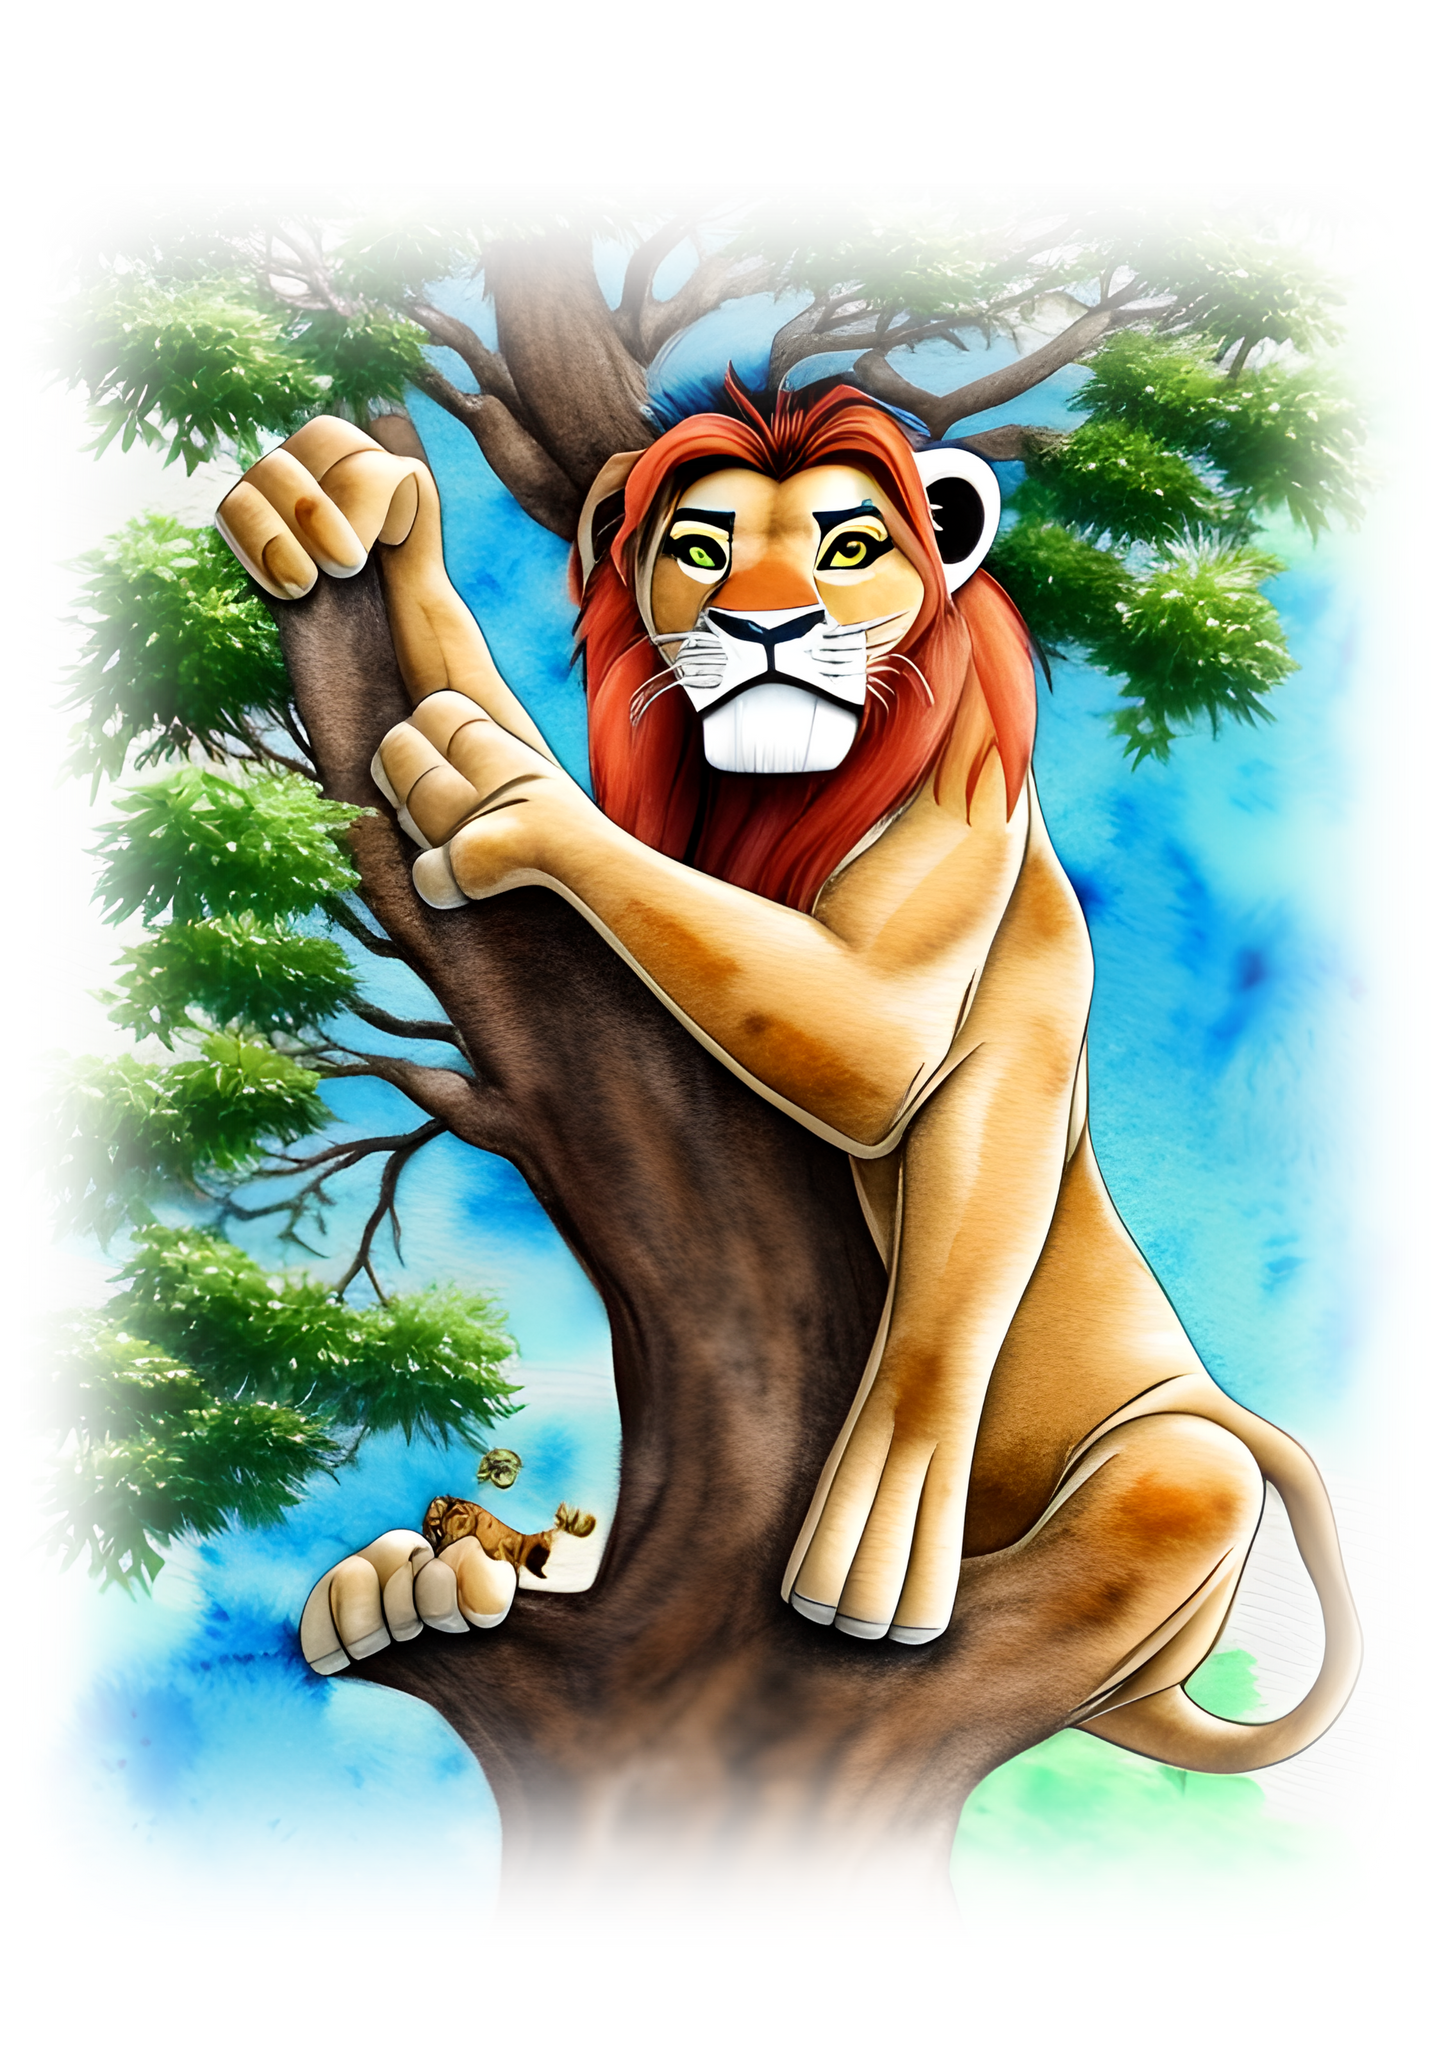 Lion in a tree